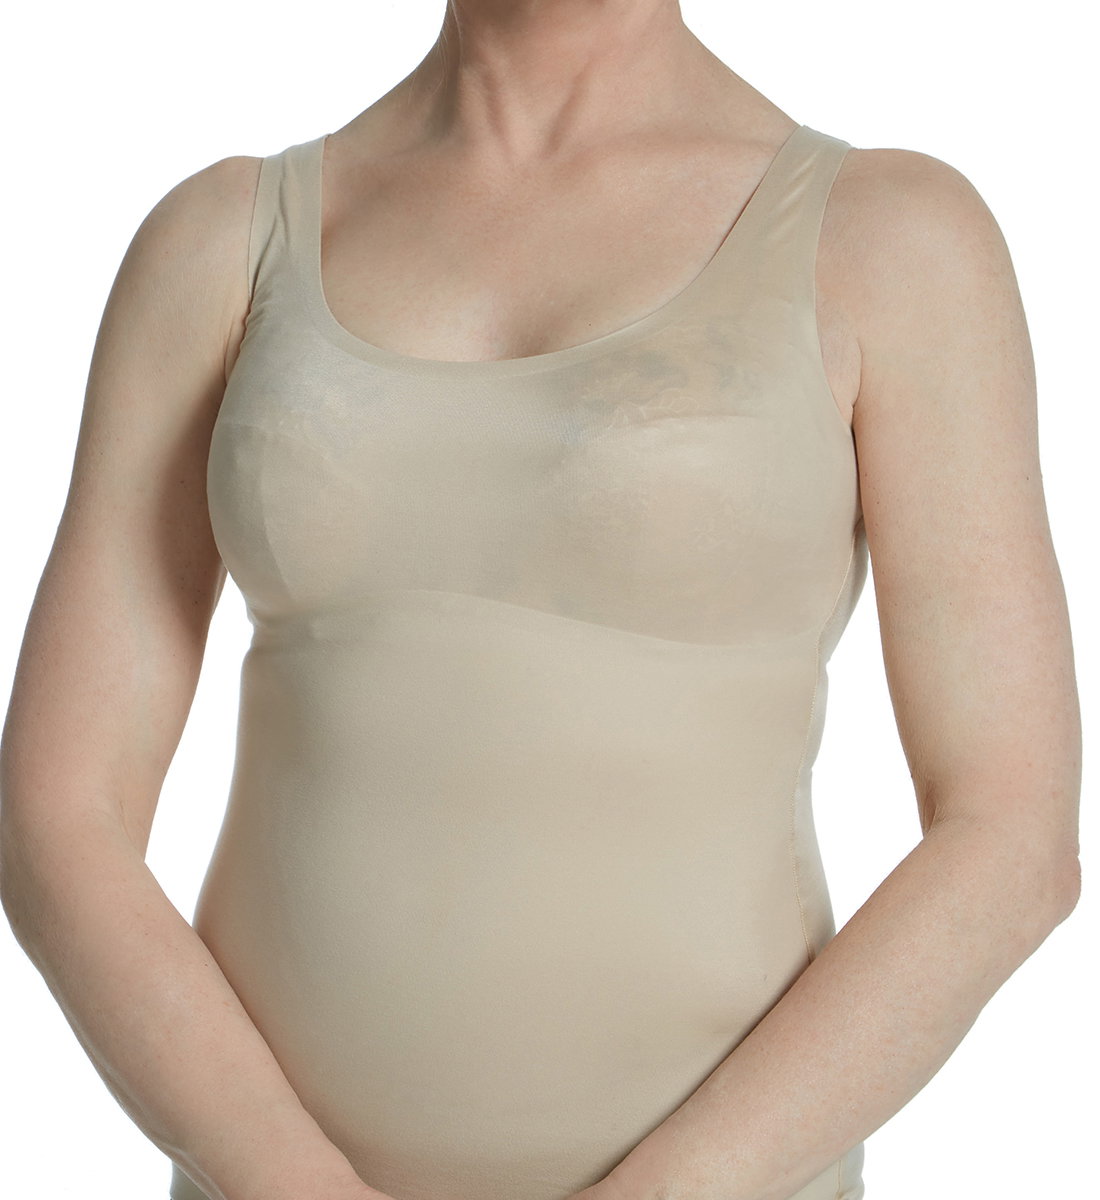 SlimMe Seamless Shaping Tank